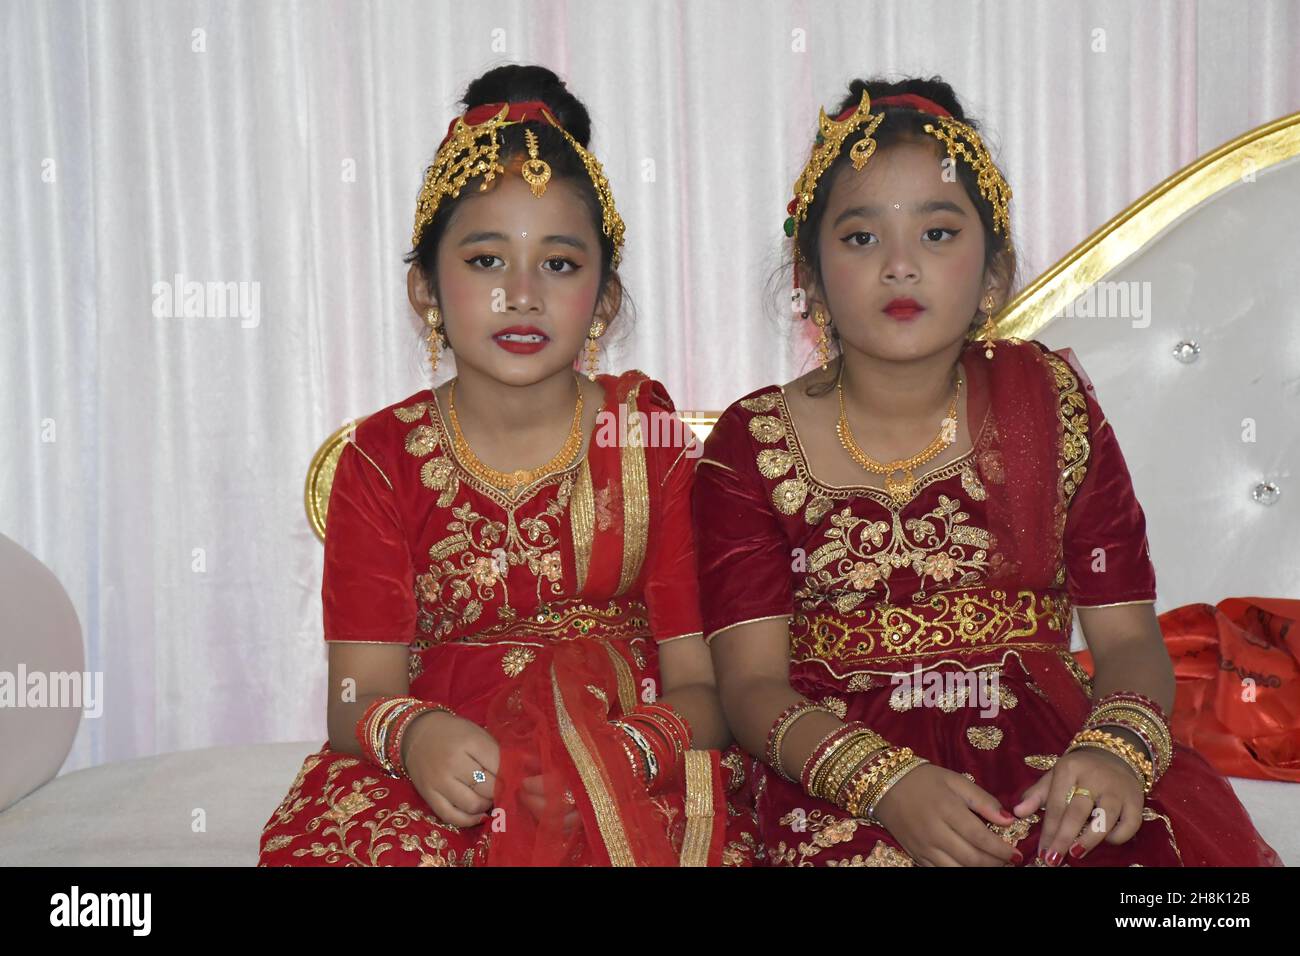 SY, AUSTRALIA - Apr 24, 2021: The two cute girls in traditional Hindu costumes for EEHI function in Sydney, Australia Stock Photo